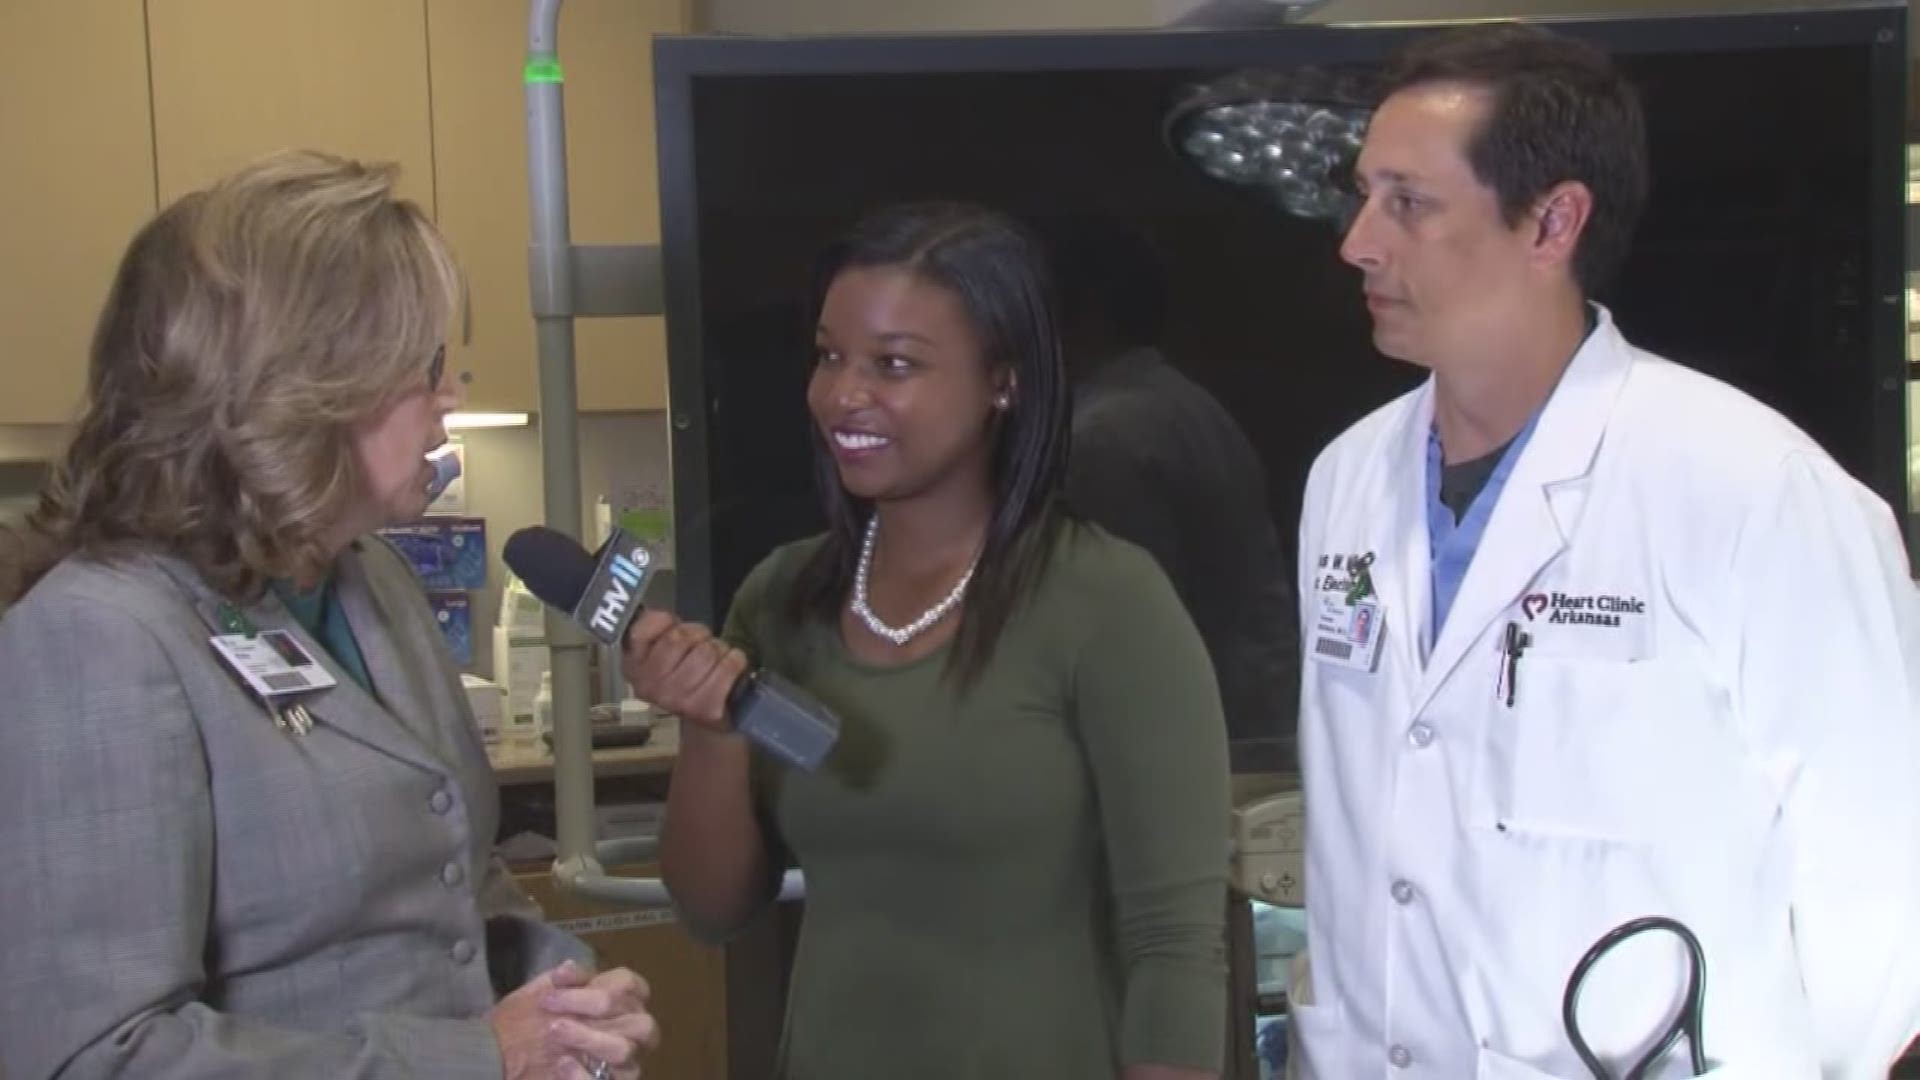 THV11's Raven Richard was live at CHI St. Vincent when they made the announcement that they have been named the best hospital in Arkansas for the fifth year